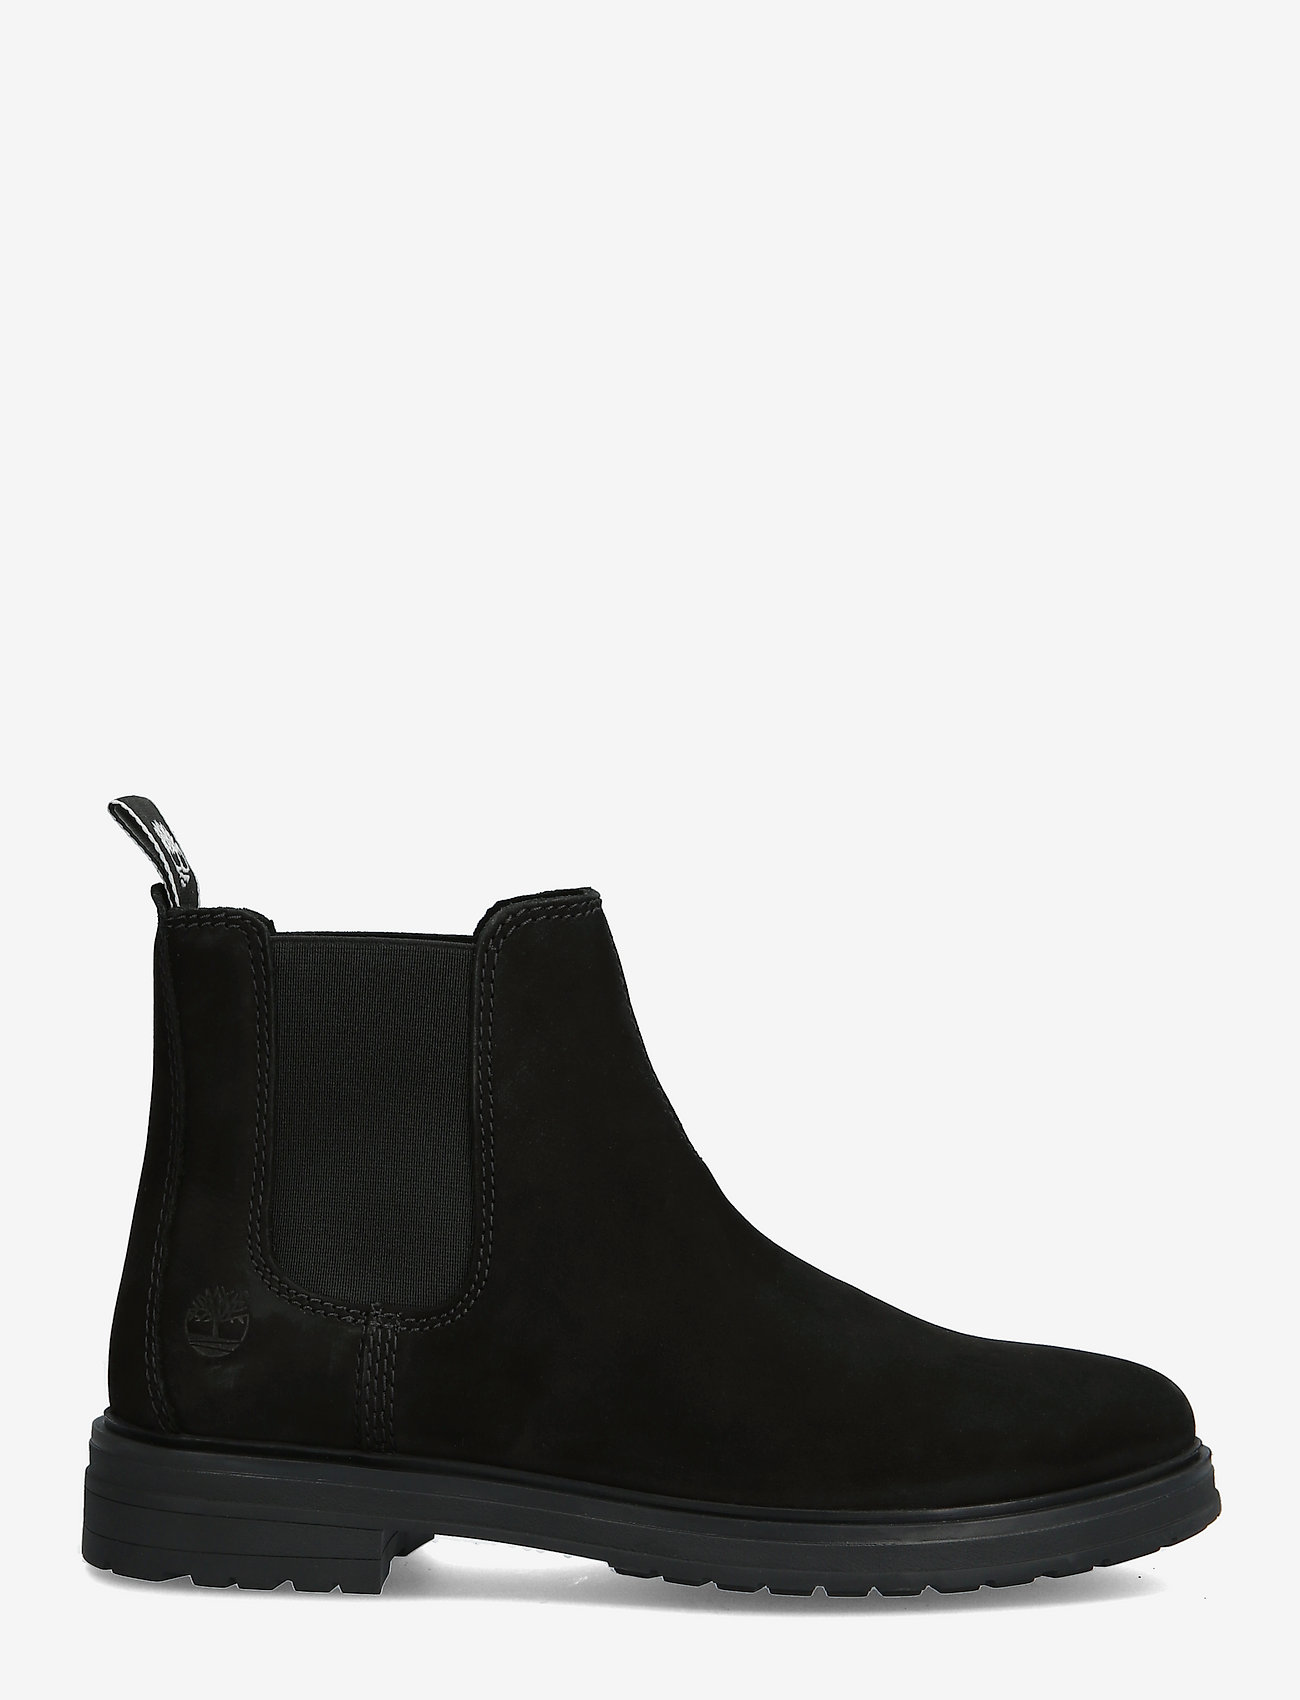 Timberland - Hannover Hill Chelsea - black - 1